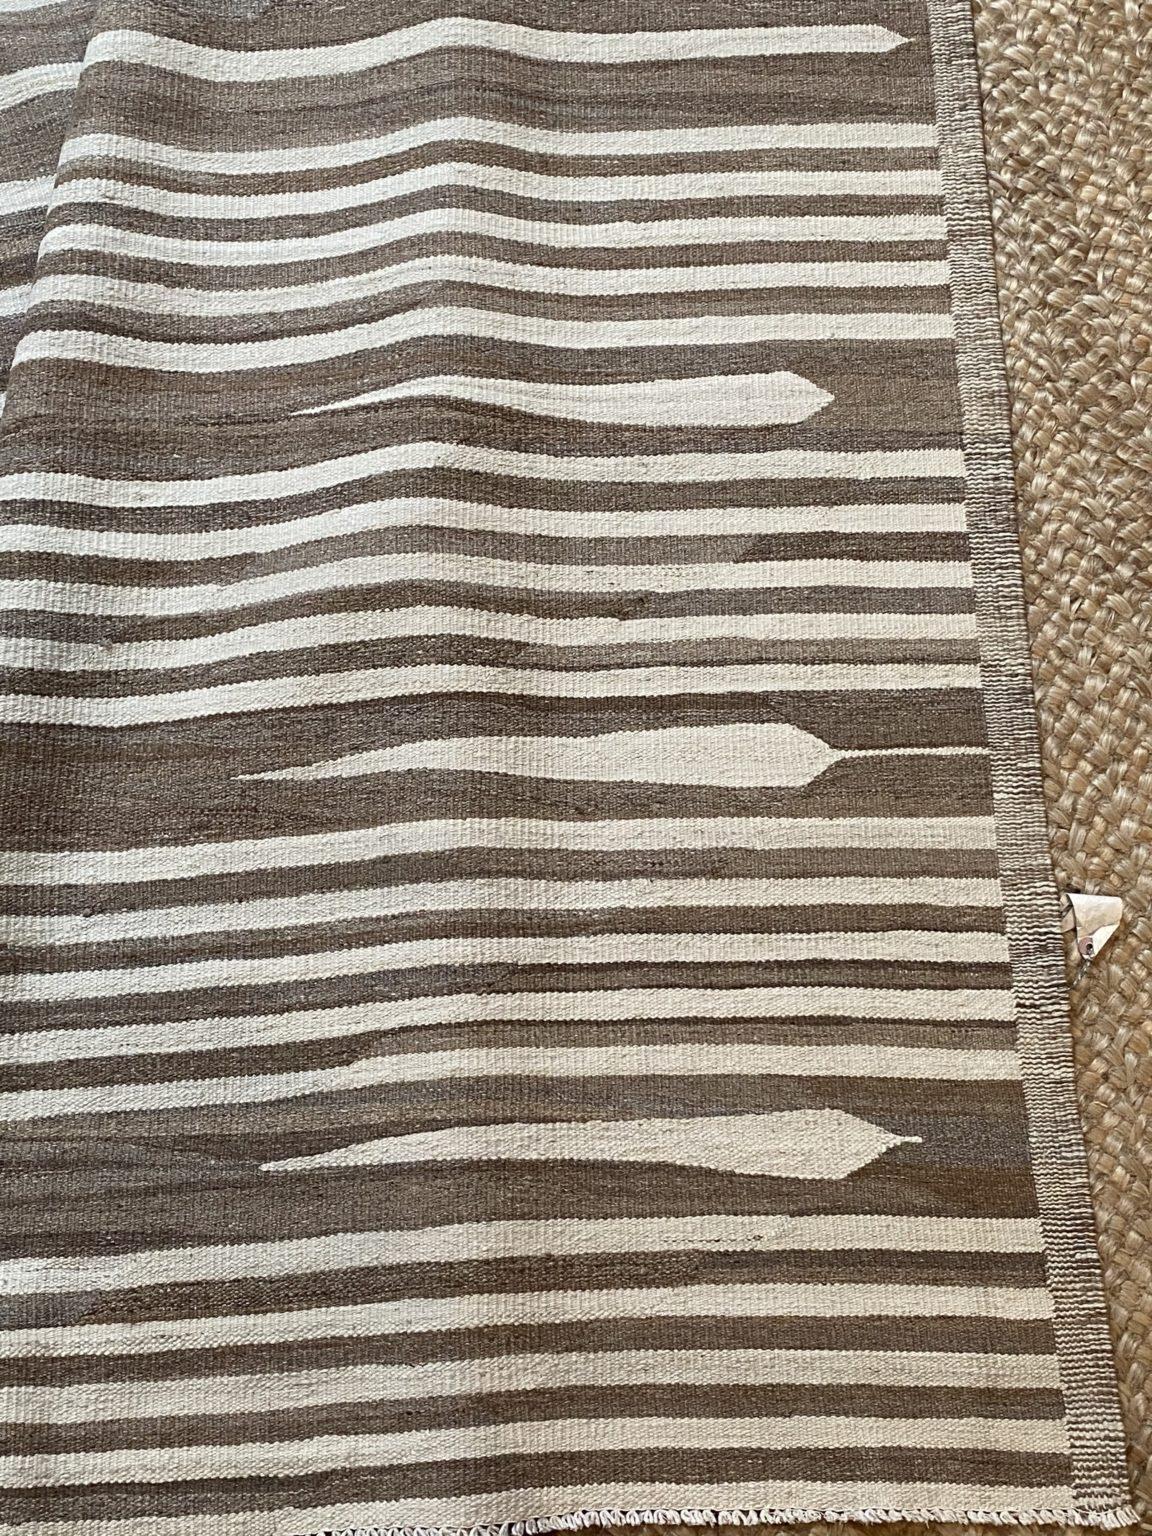 Chocolate stripes kilim In Good Condition For Sale In Sag Harbor, NY